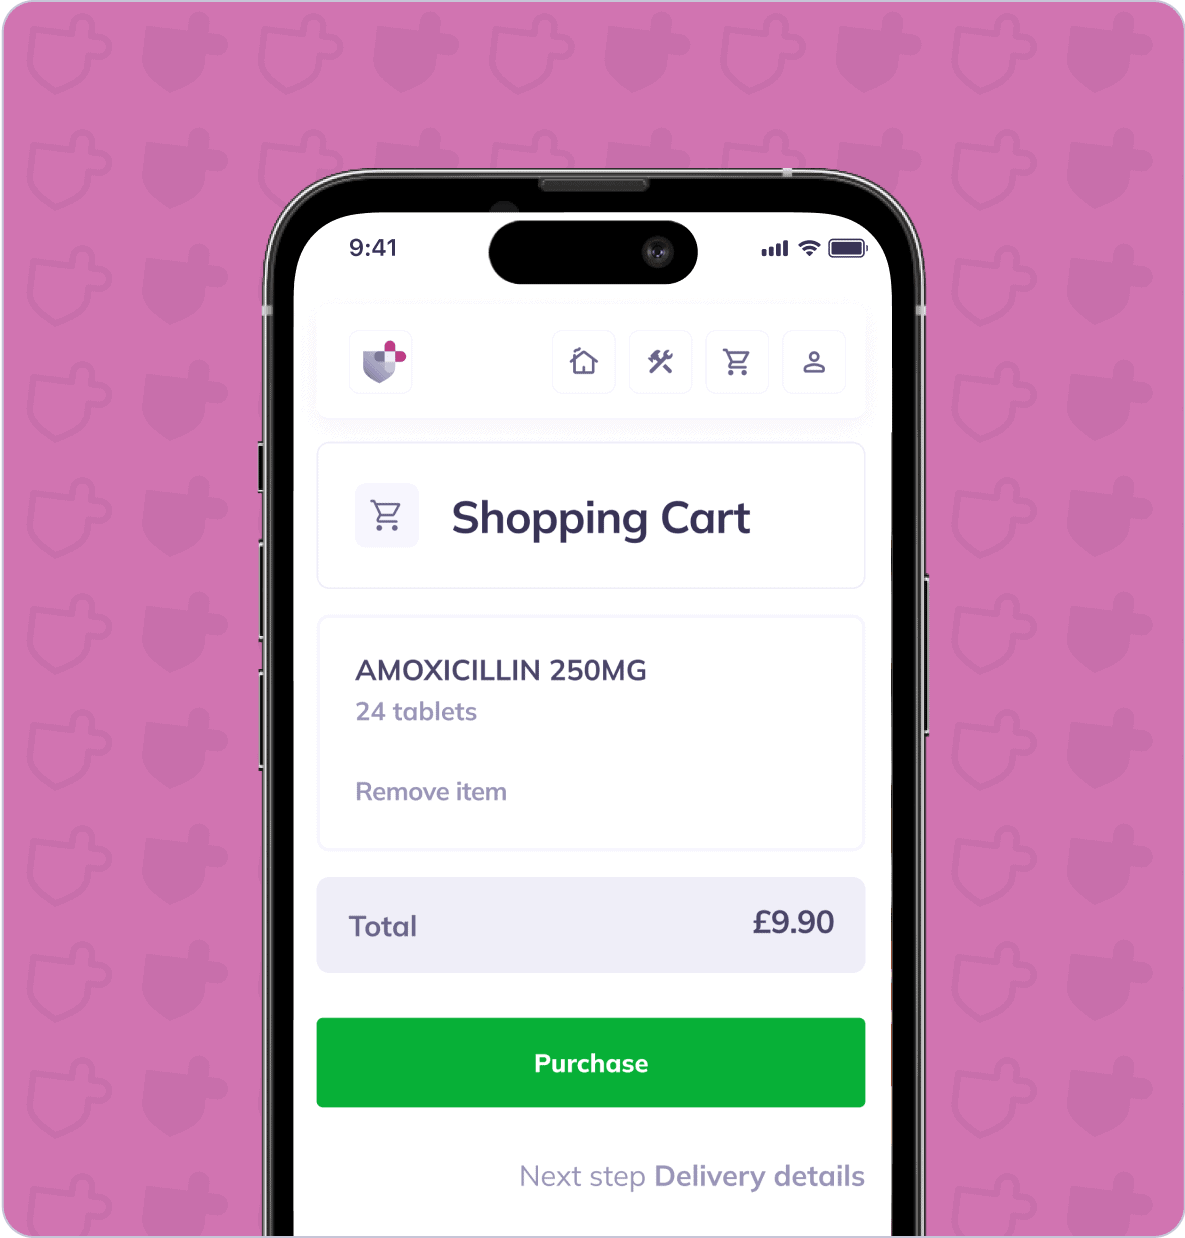 A smartphone displaying a shopping cart screen for purchasing 24 tablets of Amoxicillin 250mg for £9.90, with an option to remove the item and a button to proceed to delivery details.